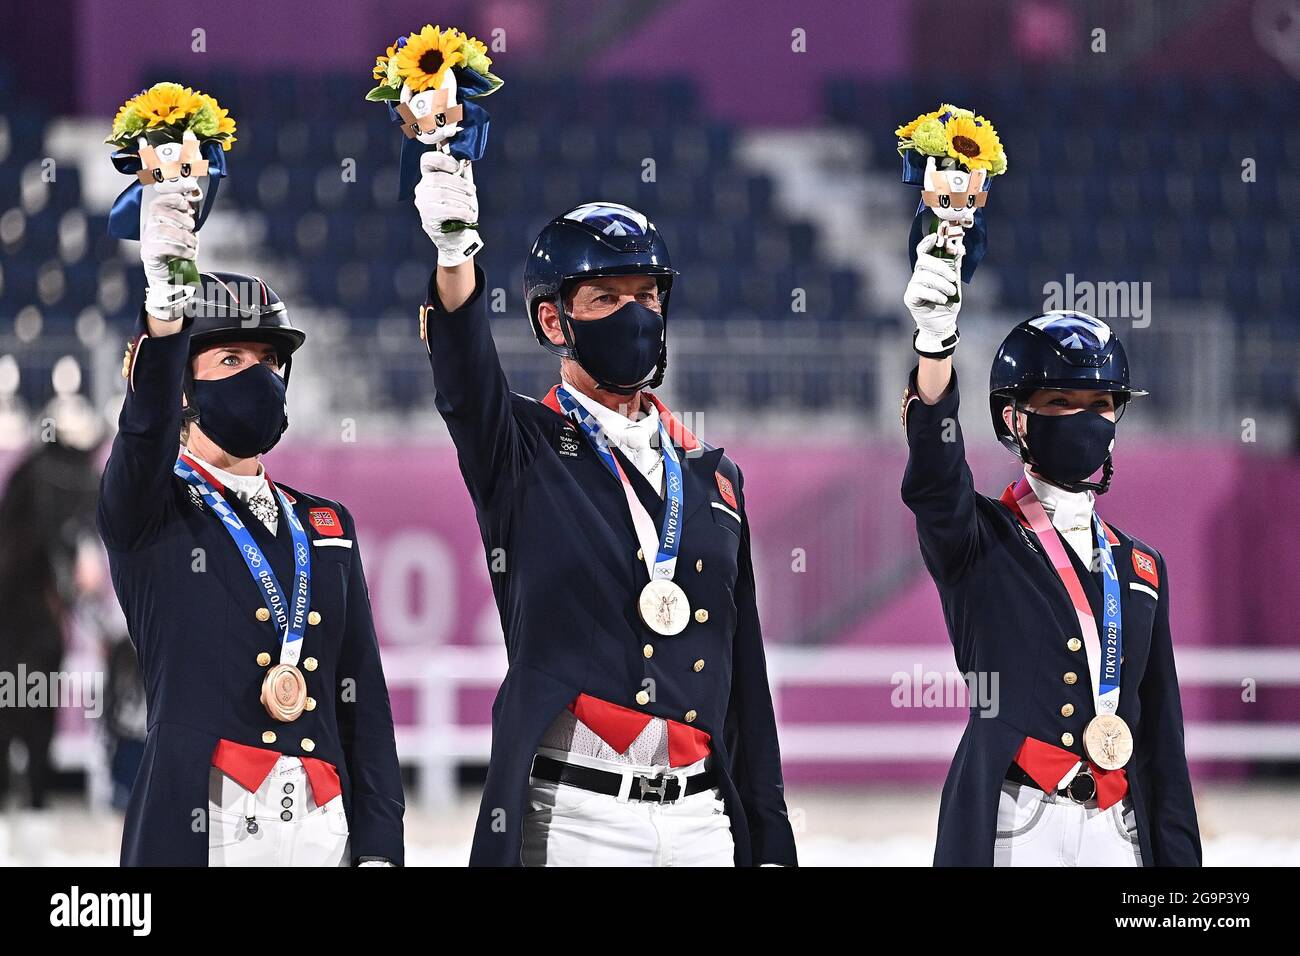 Tokyo, Japan. 27th July, 2021. Dressage Team. Grand Prix Special. Team Final. Equestrian Park. 1-1. 2Chome. Kamiyoga. Setagaya. Tokyo. Bronze medalists. (l to r) Charlotte Dujardin, Carl Hester and Charlotte Fry (GBR). Credit Garry Bowden/Sport in Pictures/Alamy live news Credit: Sport In Pictures/Alamy Live News Stock Photo